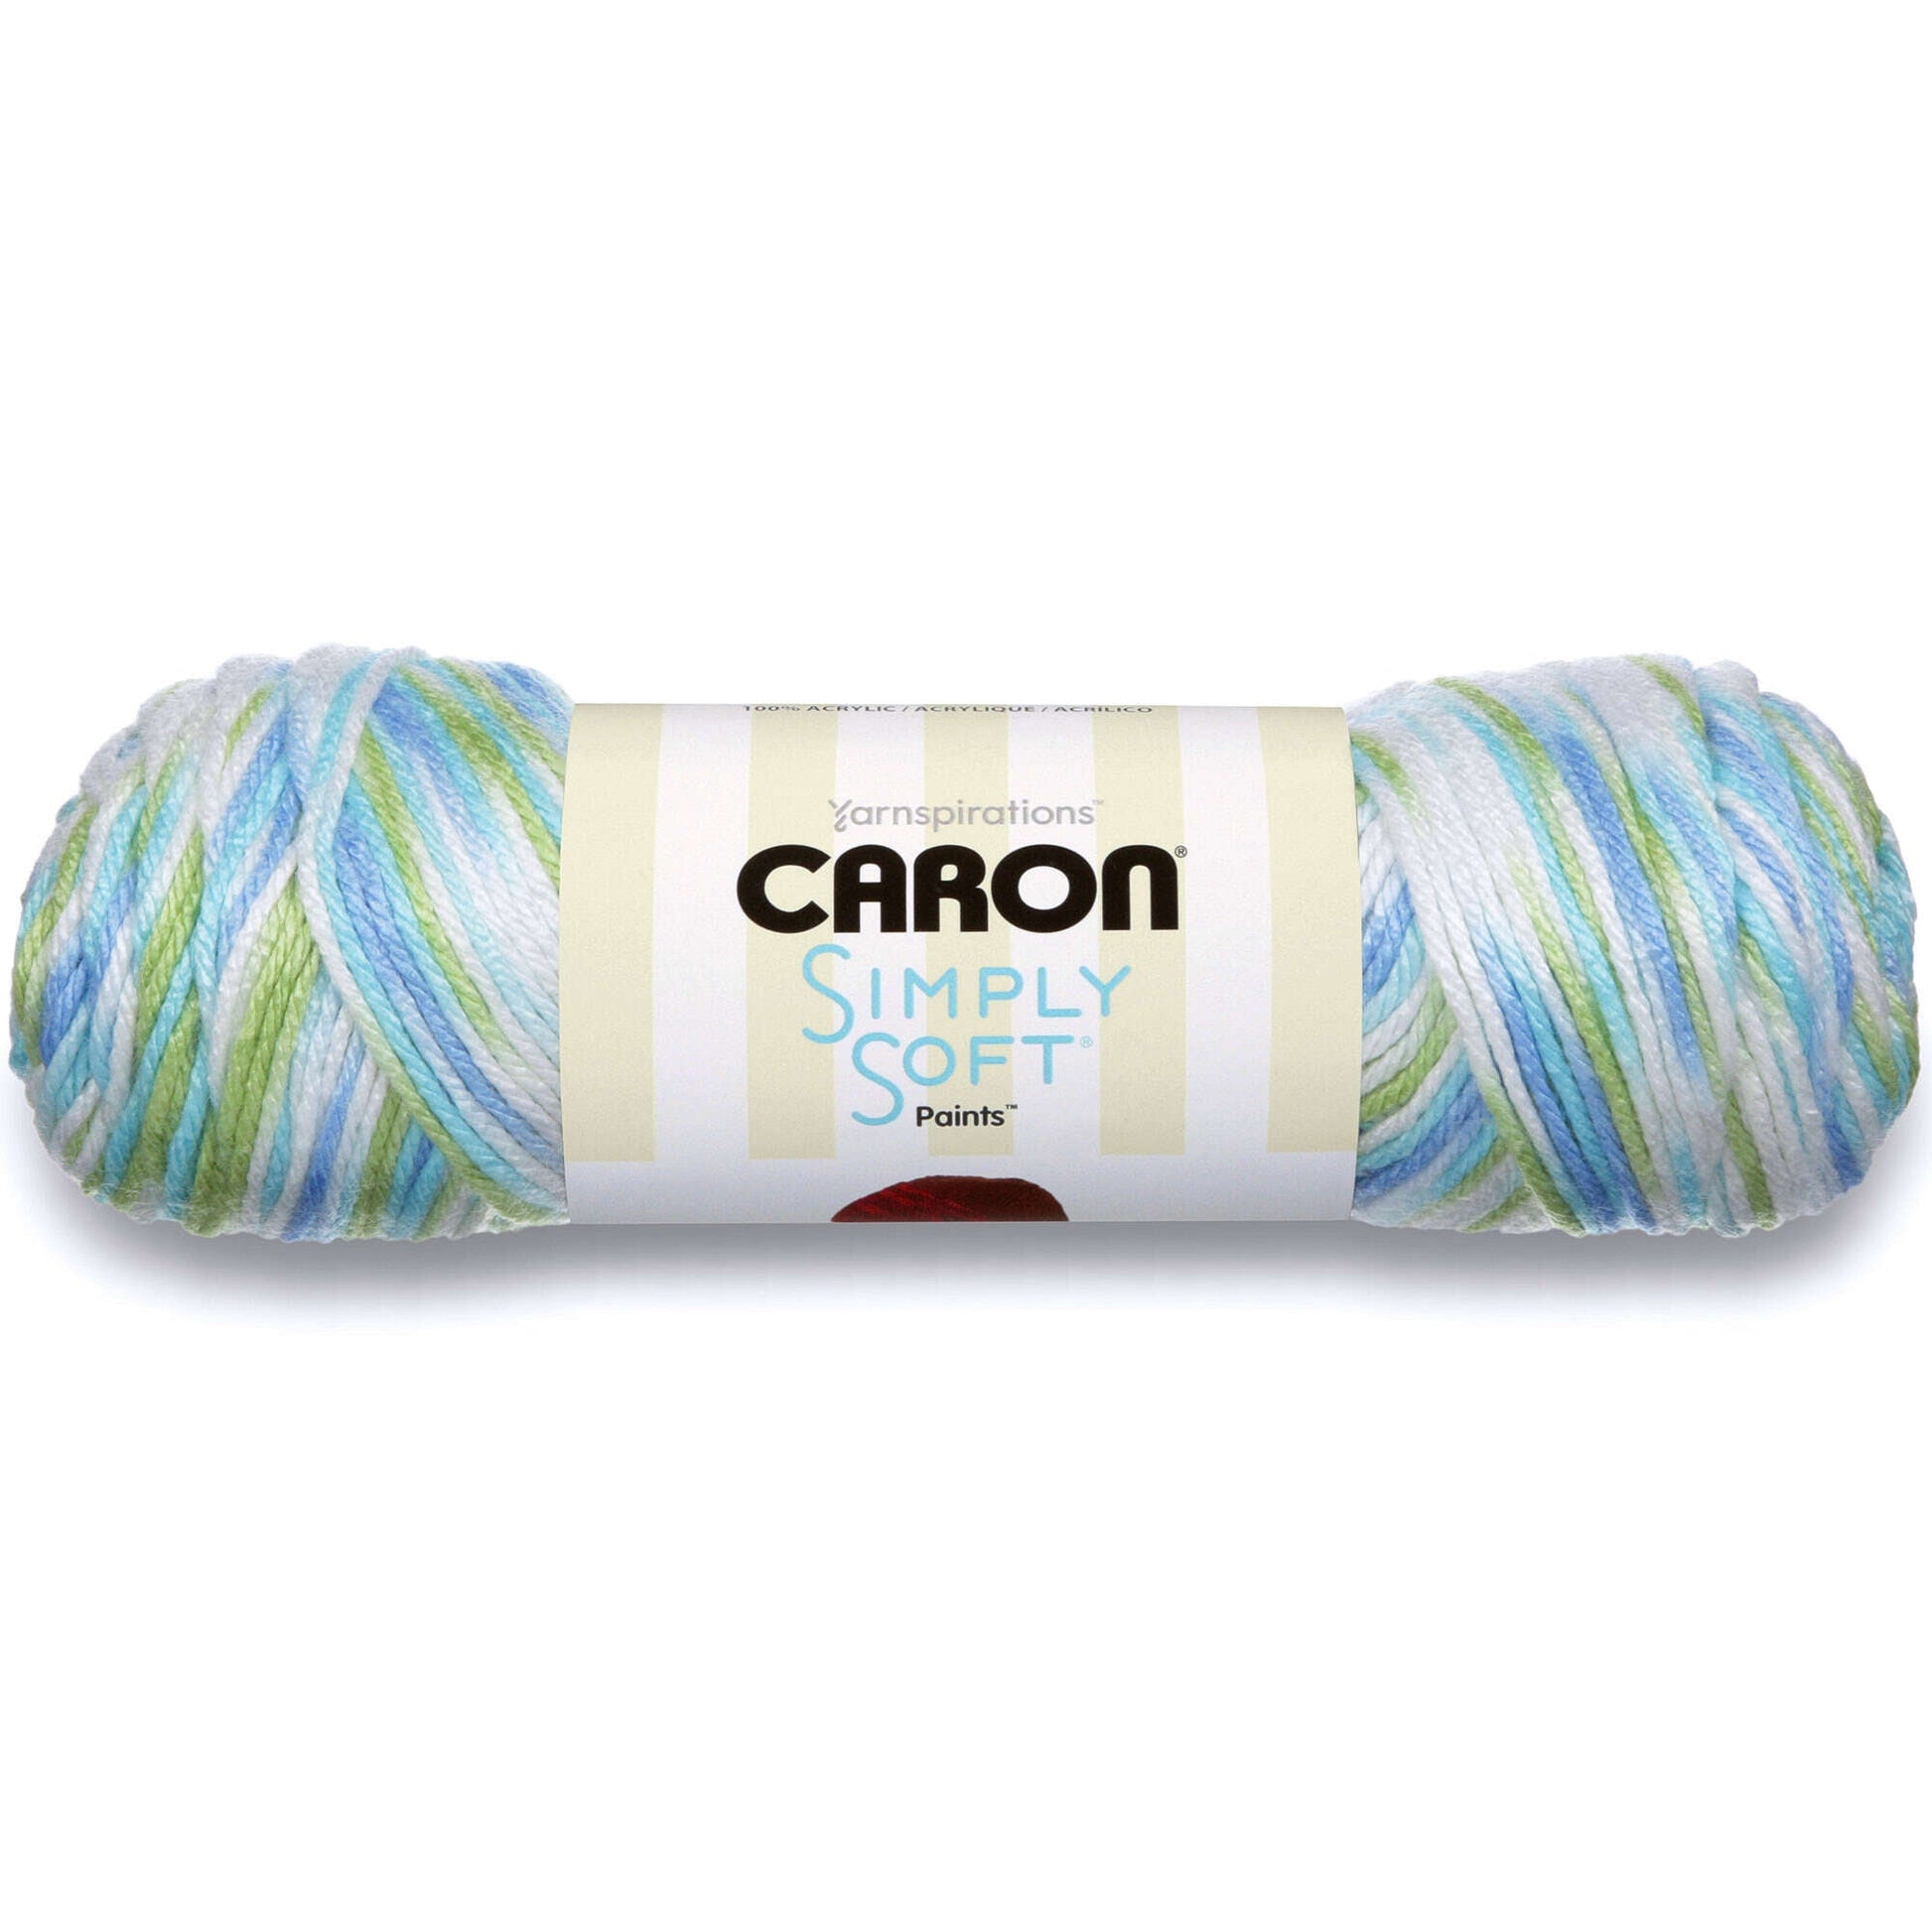 Caron Simply Soft Solids Yarn-Country Blue H97003-9710 - GettyCrafts